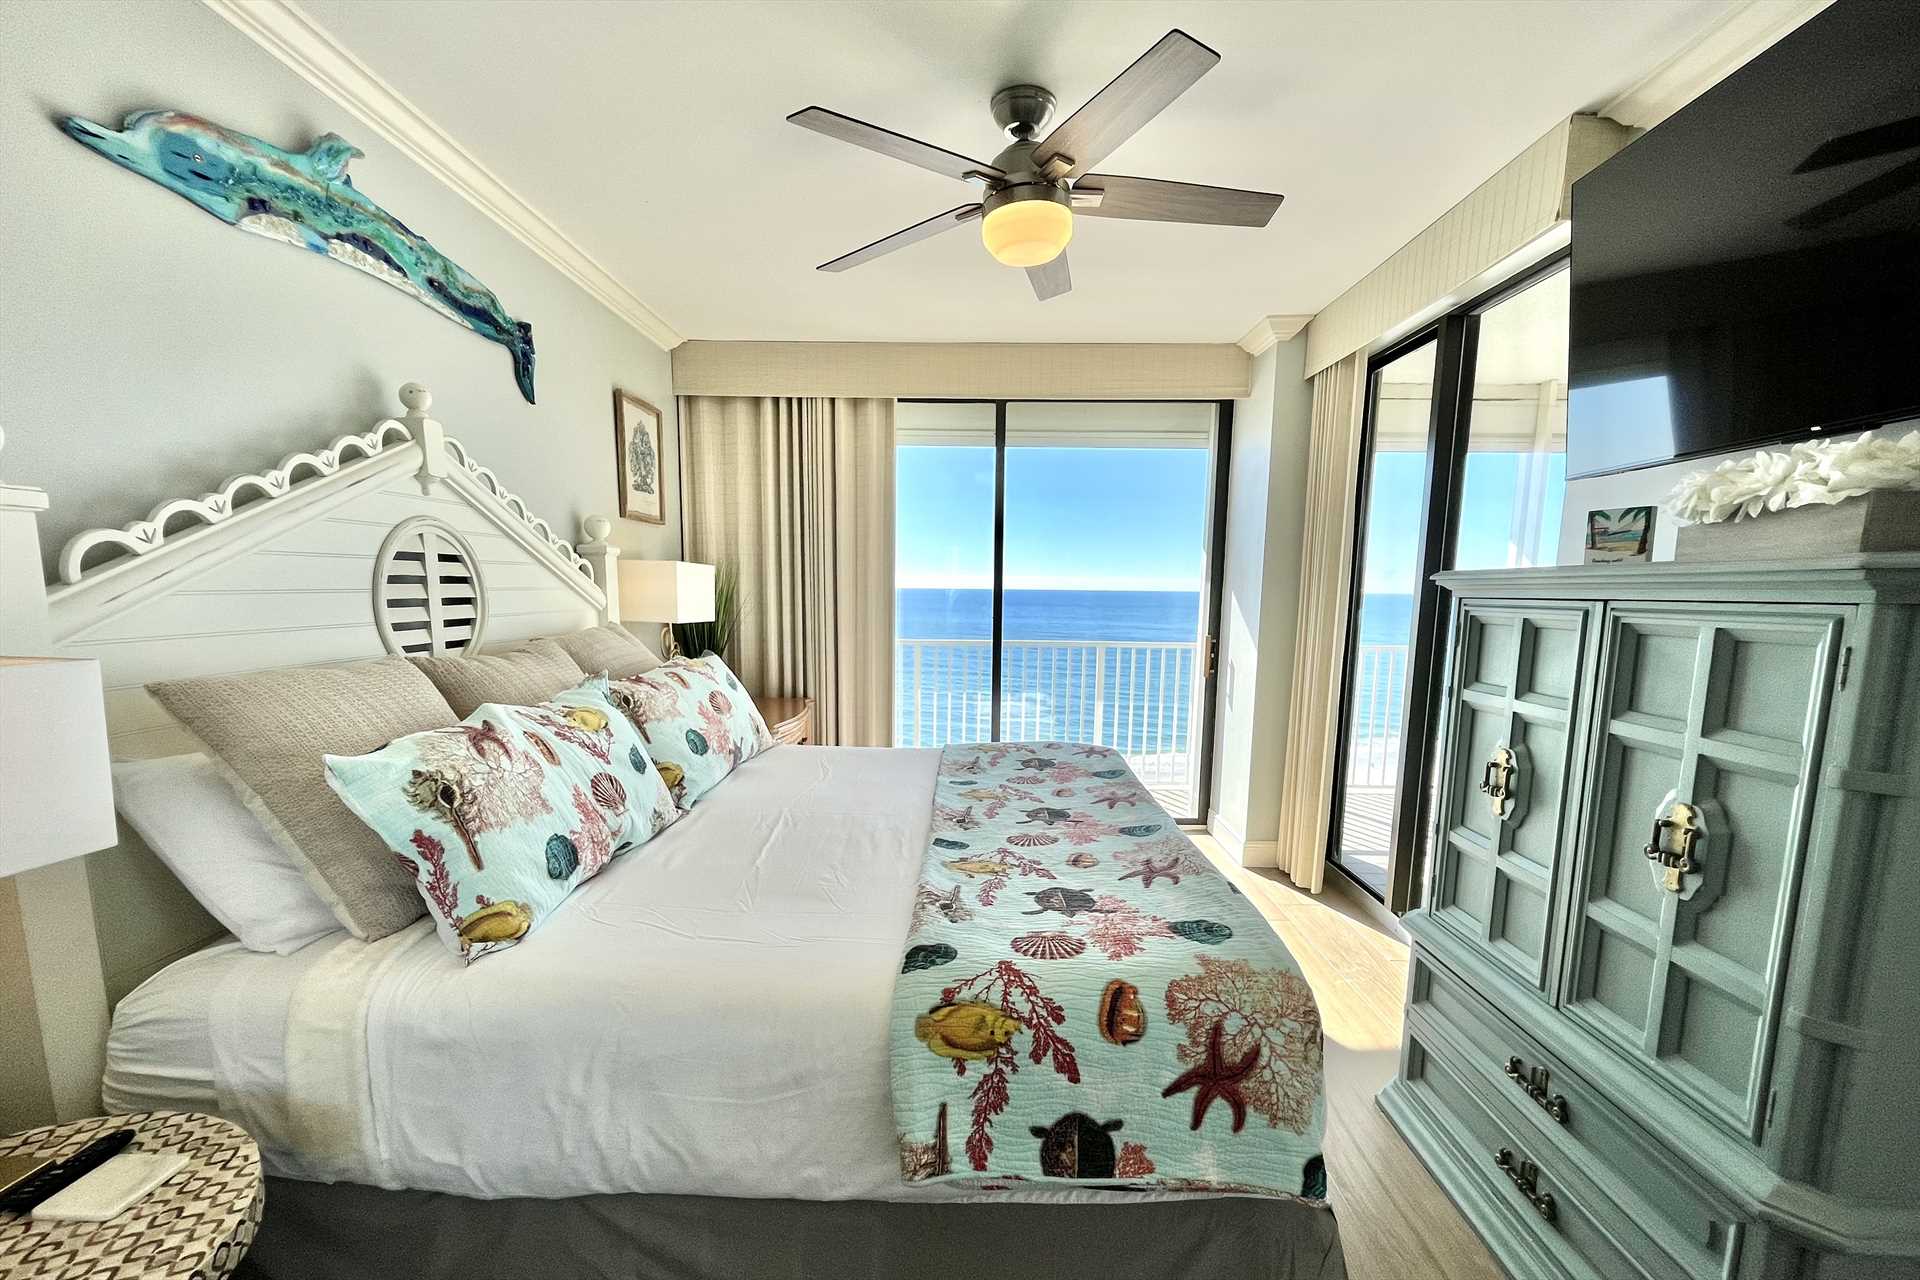 Wake up refreshed with beach front views.